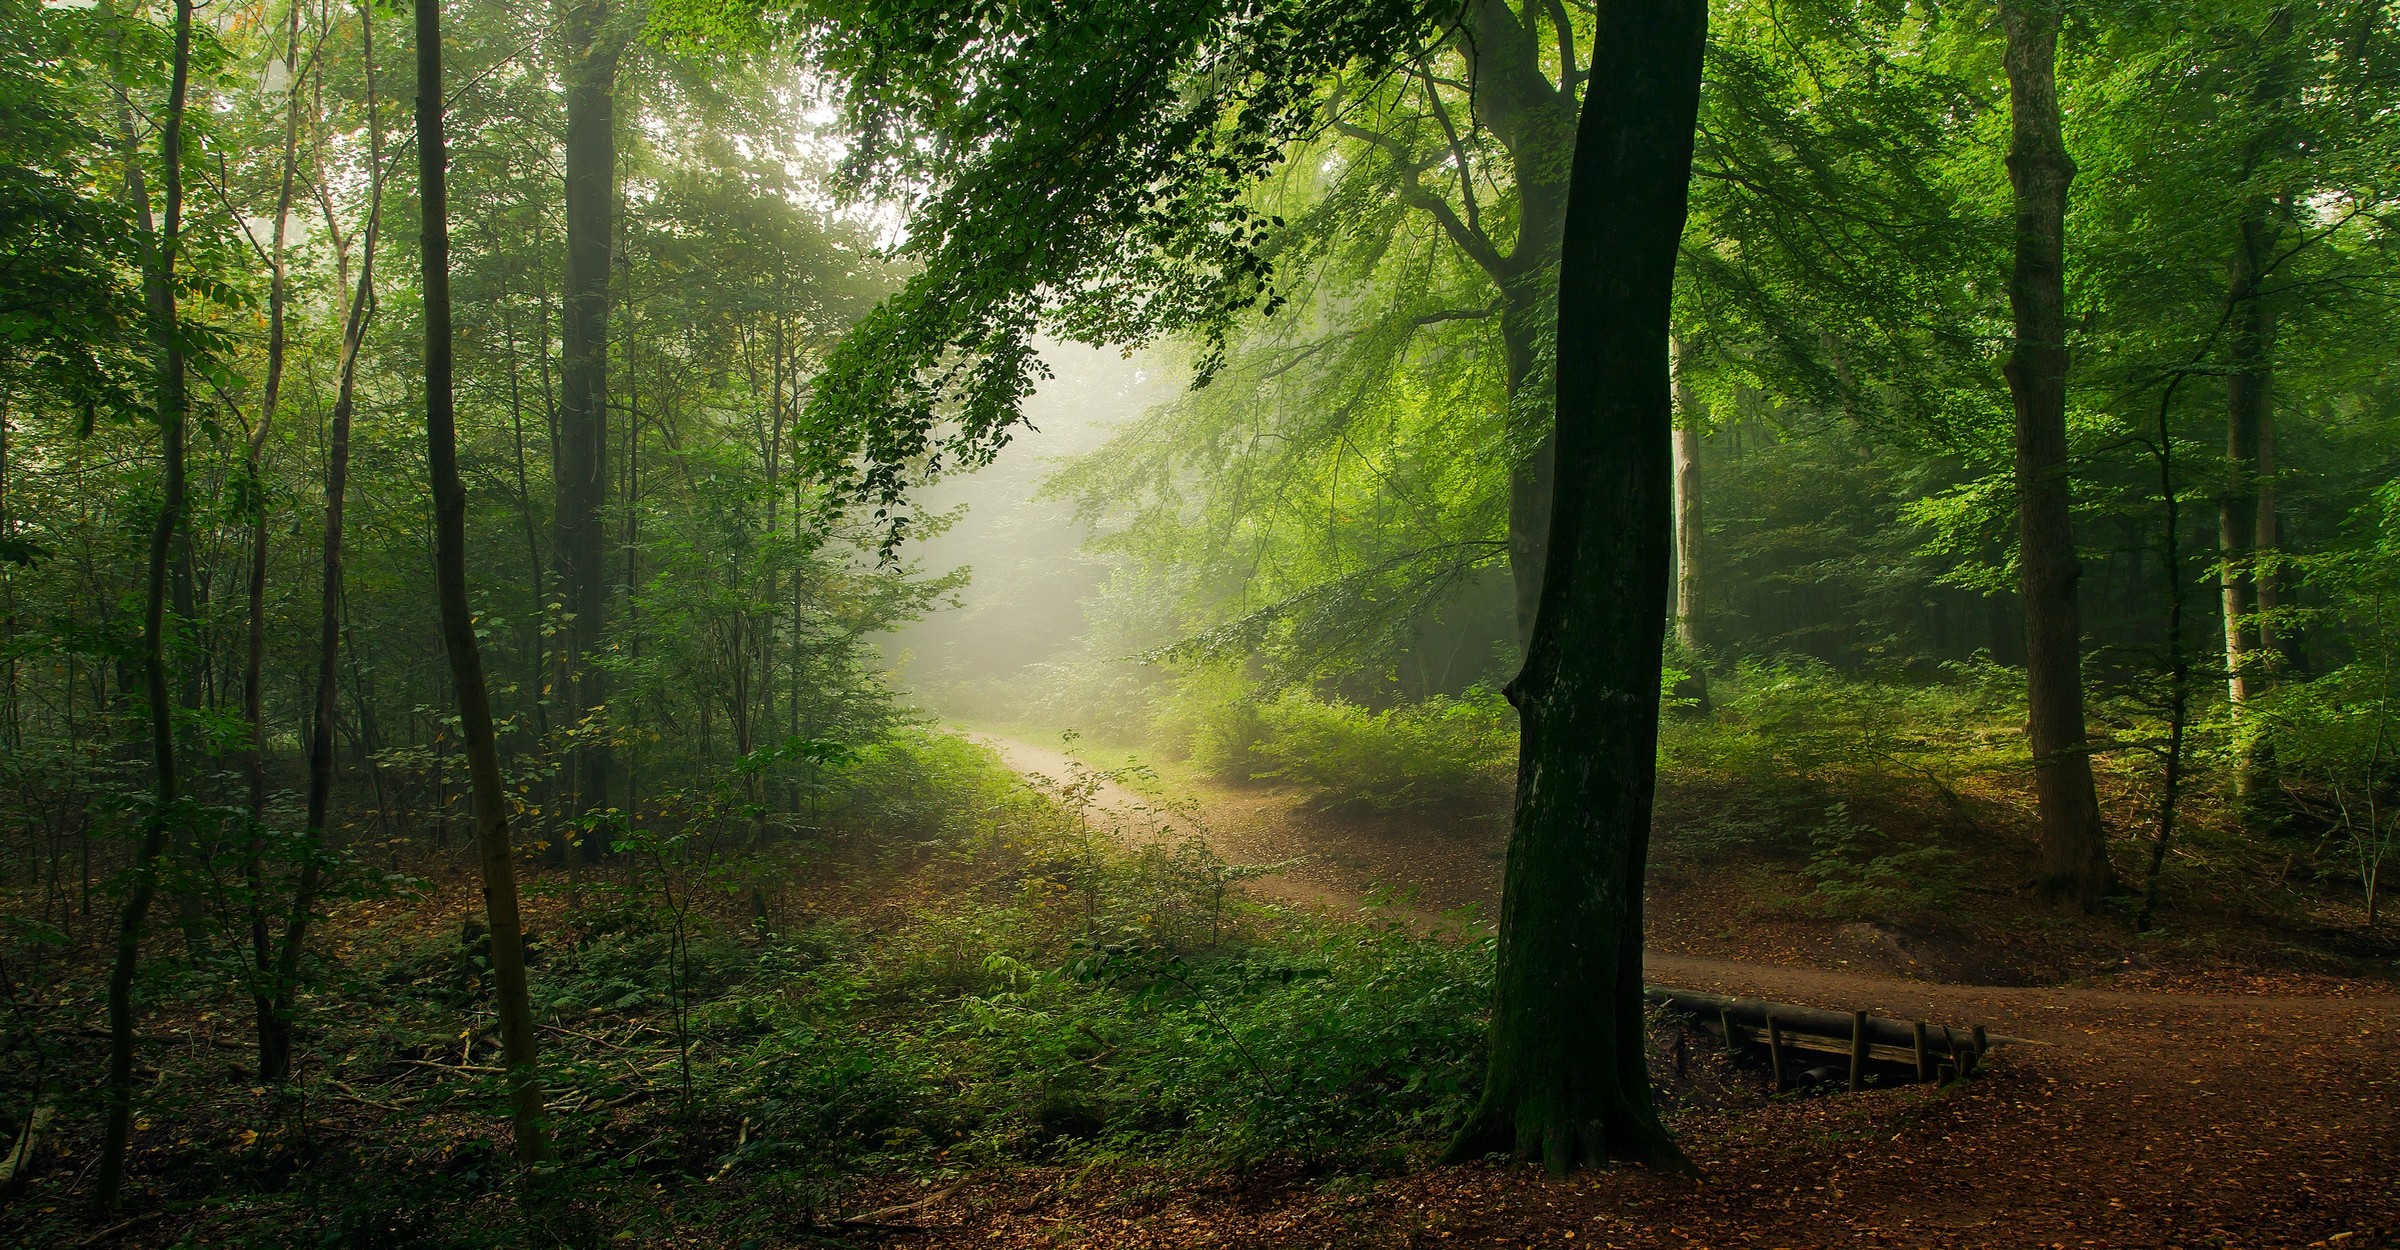 General 2400x1250 nature path forest mist shrubs morning trees